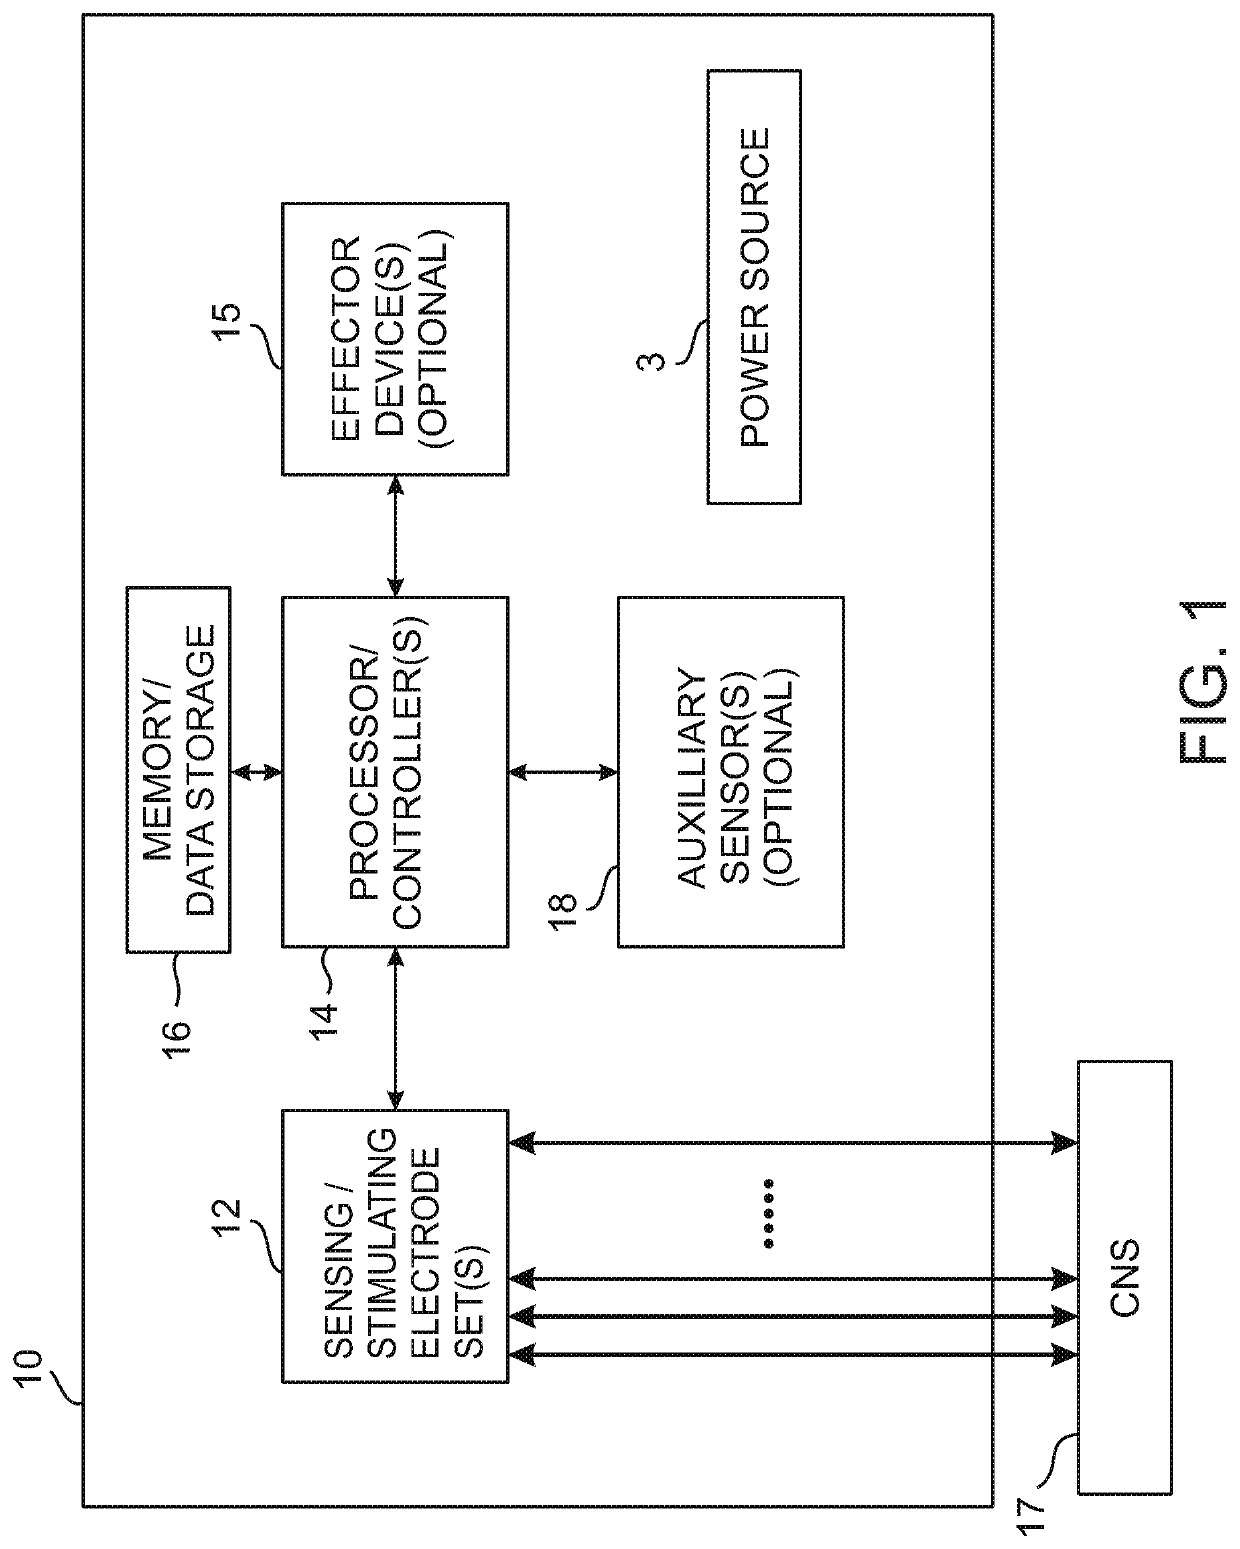 Brain computer interface systems and methods of use thereof